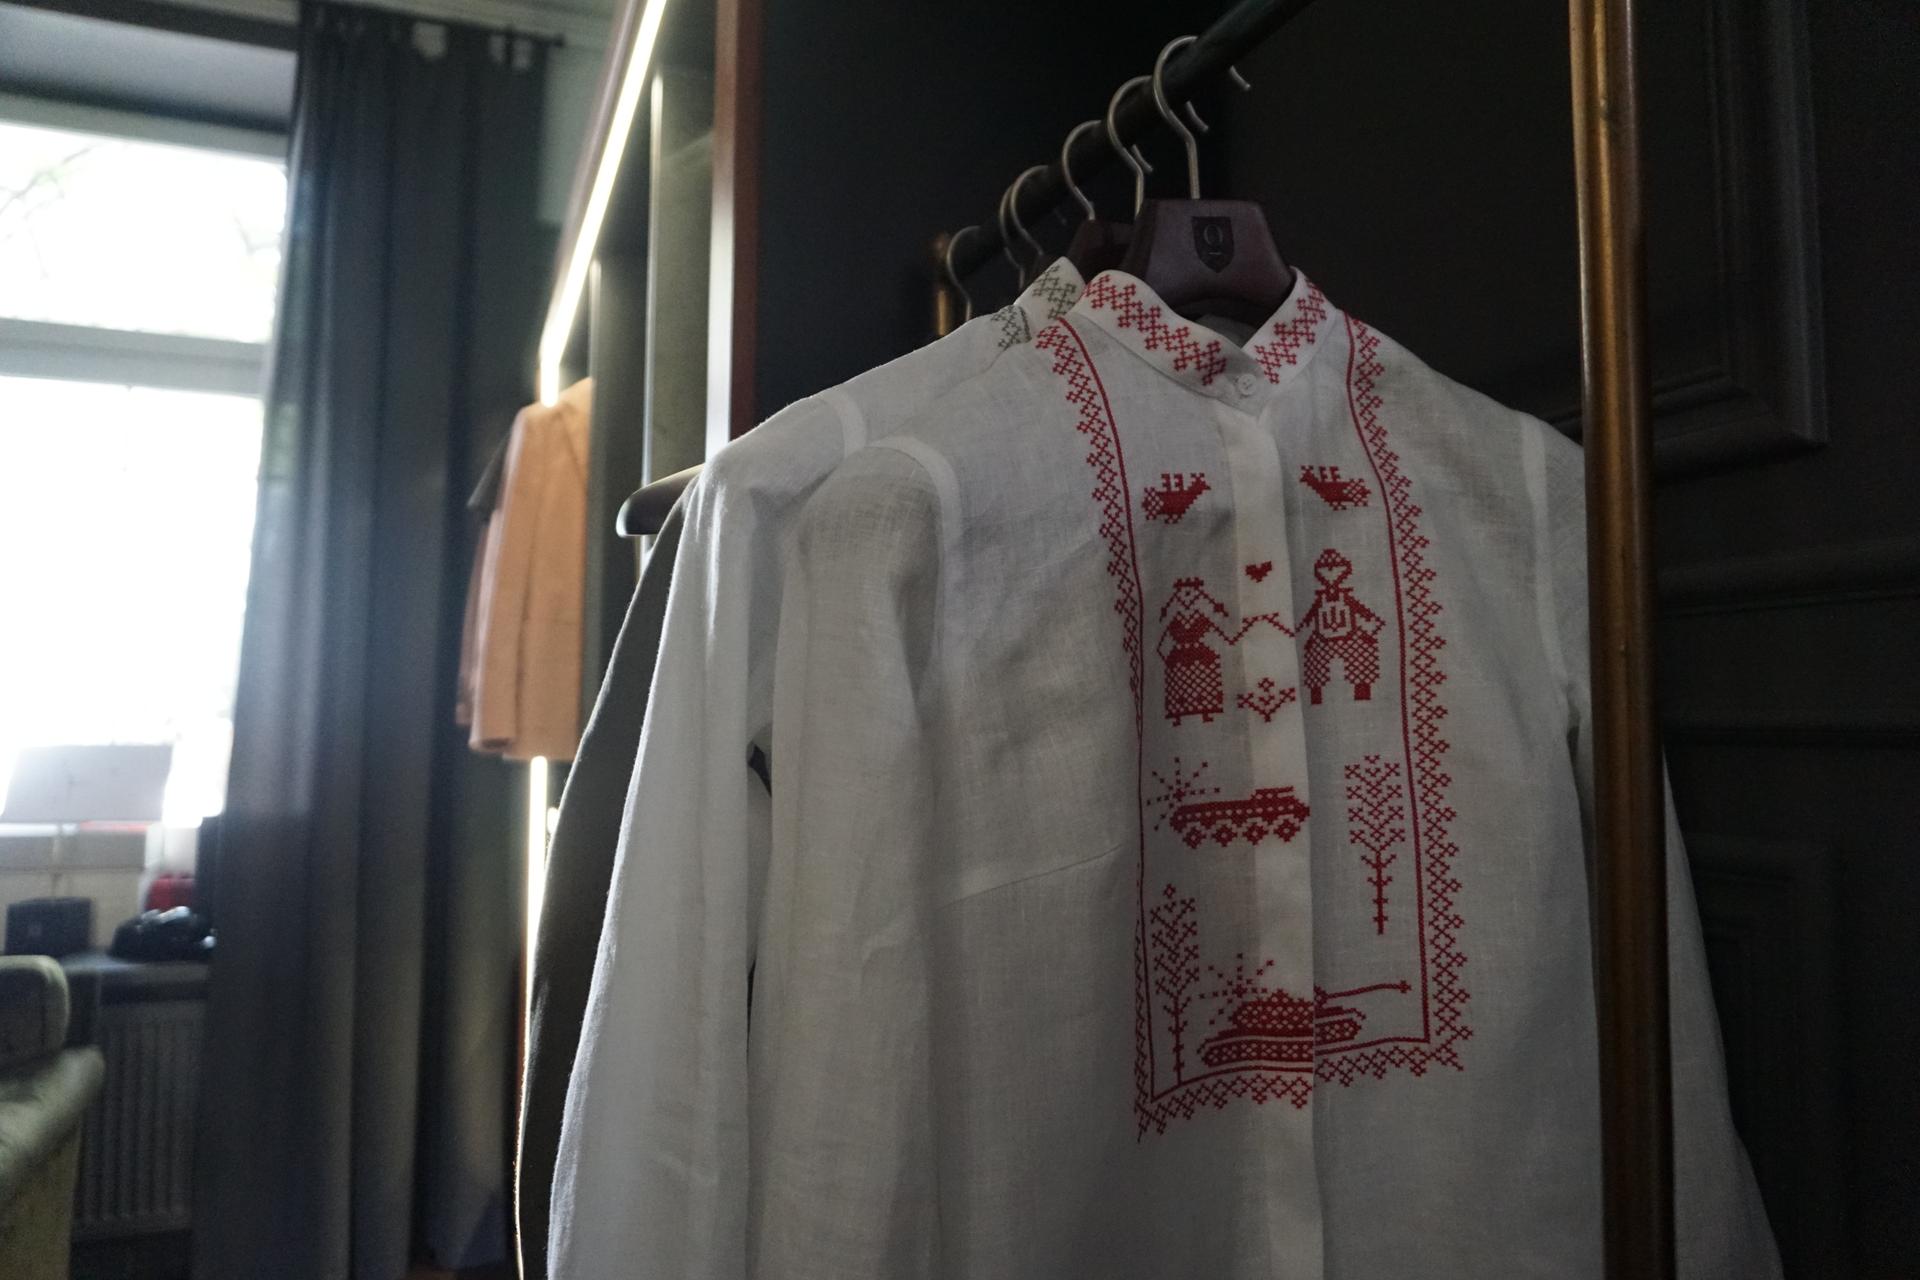 shirt with embroidery